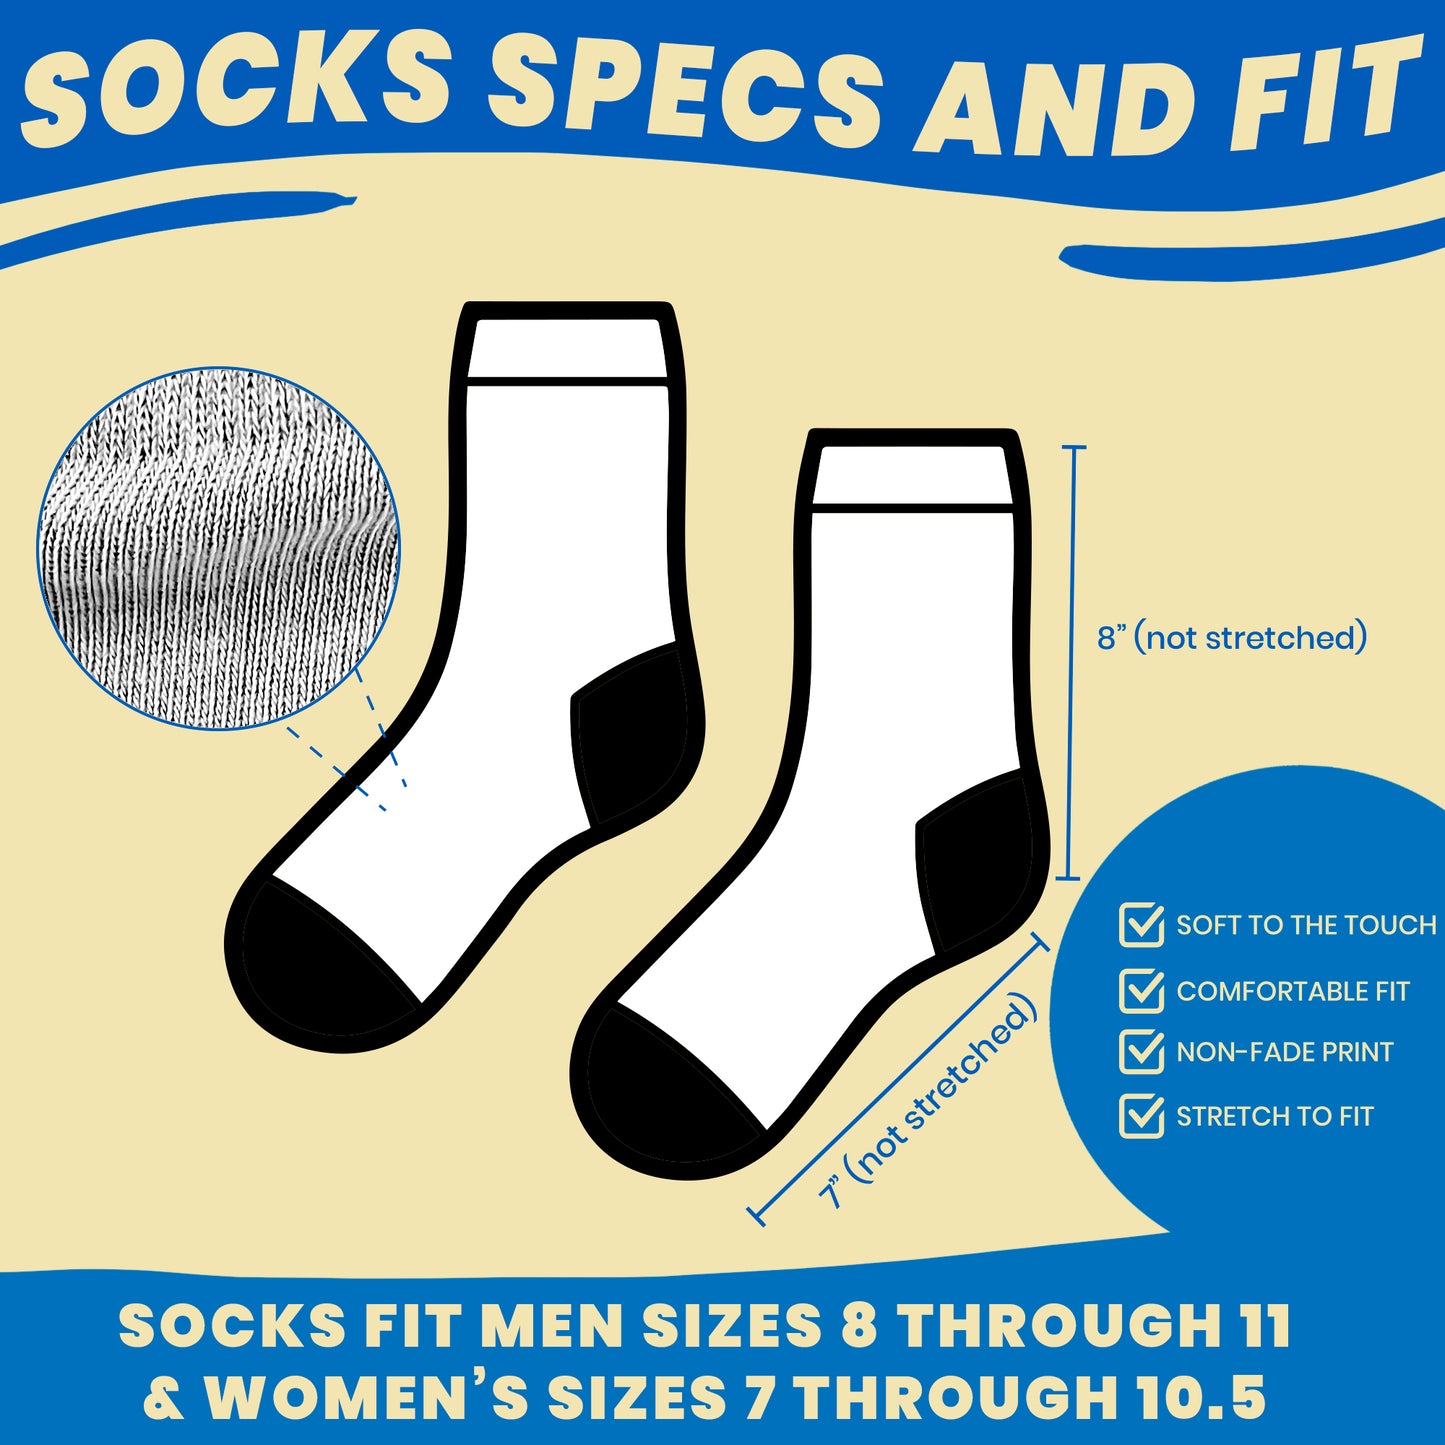 texture of socks shown in detail as well as shape of socks with black toe and heel panels